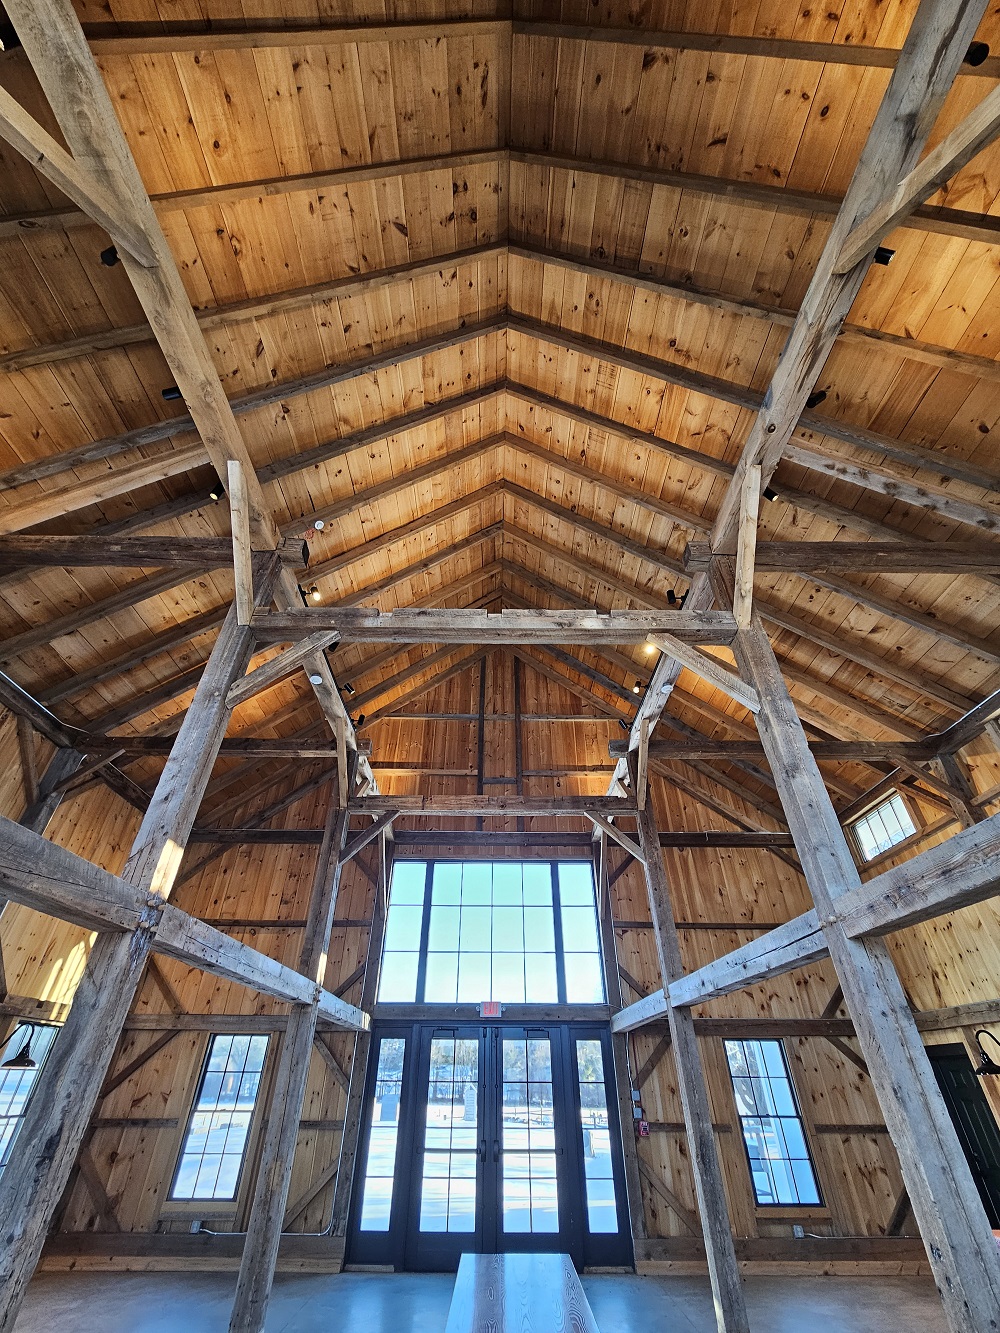 the ceiling of a wooden post and beam barn